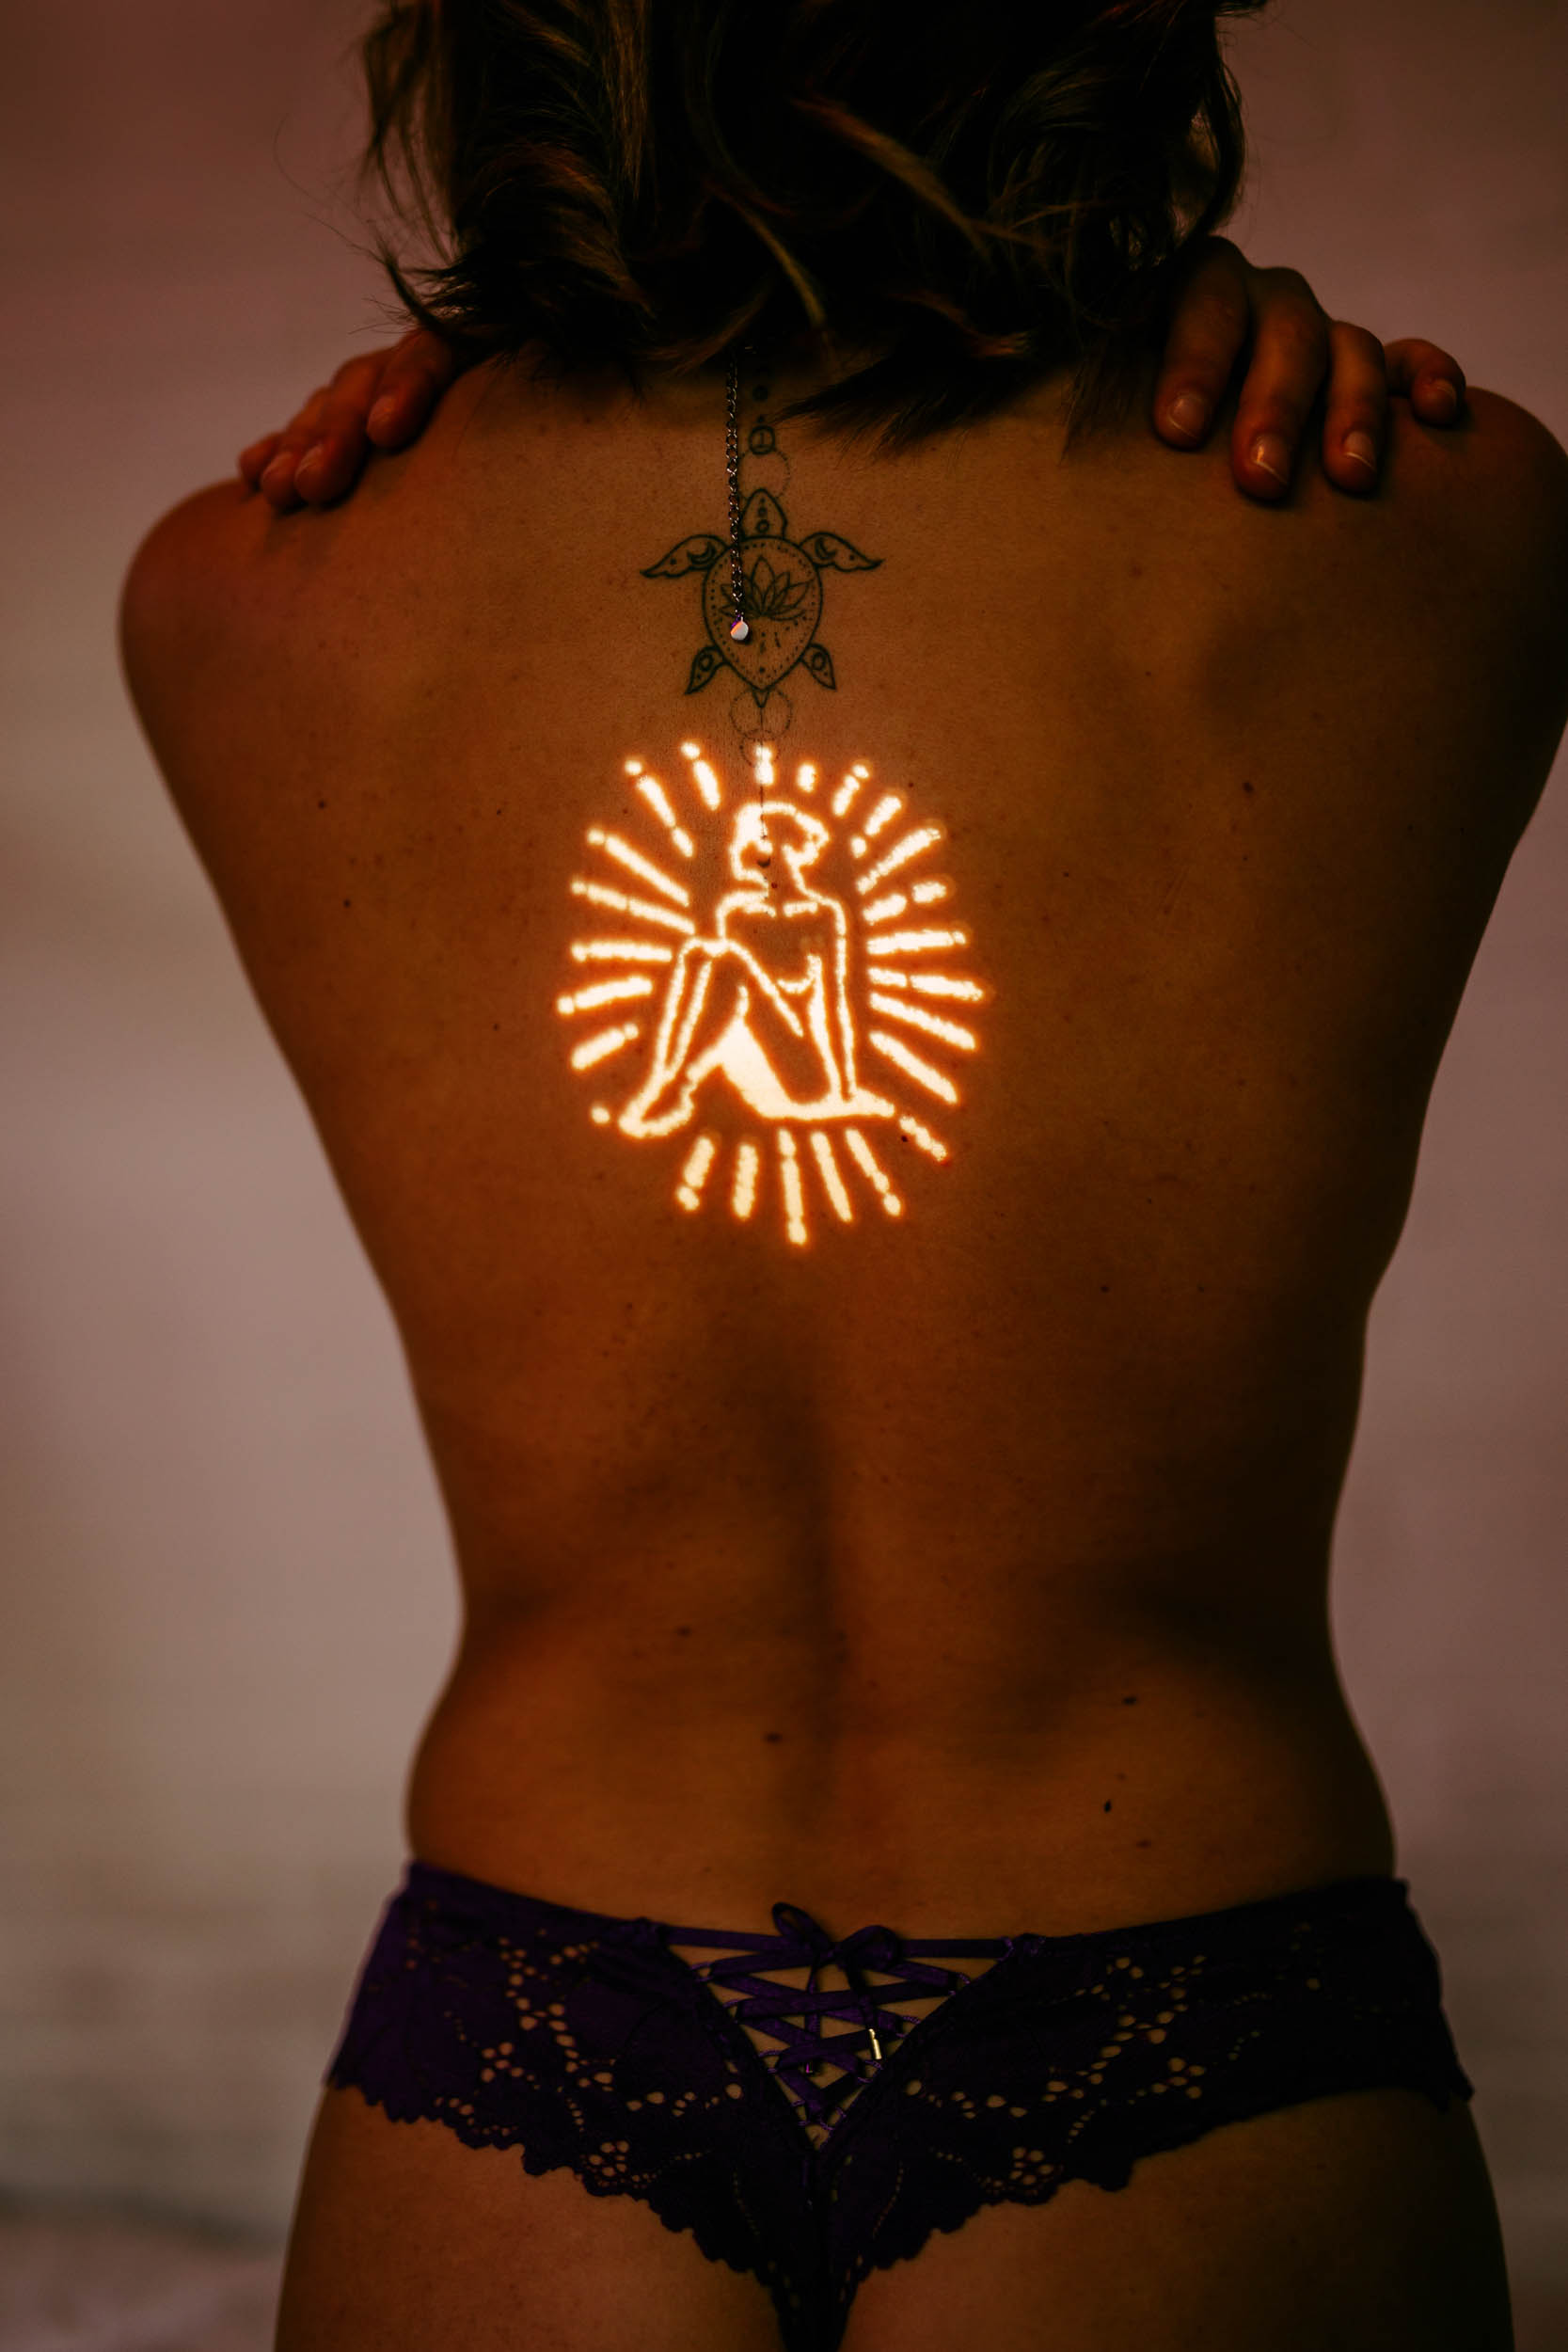 A woman with a sun tattoo on her back.